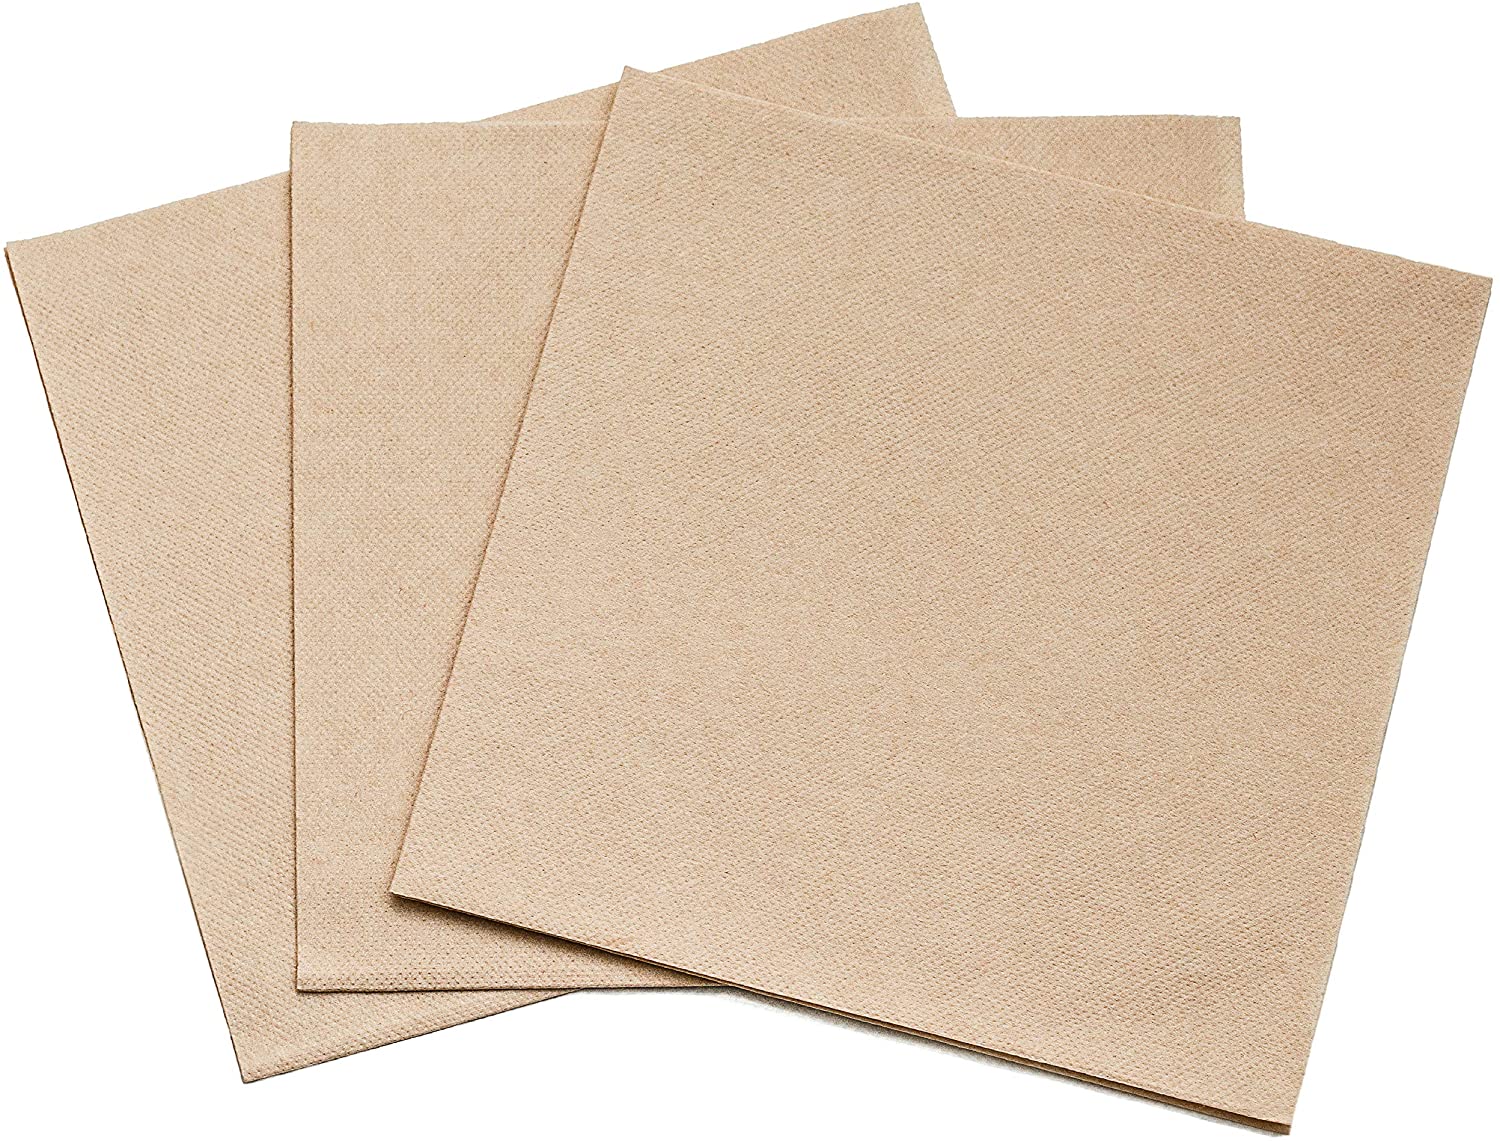 The eco-friendly choice: bamboo paper napkins